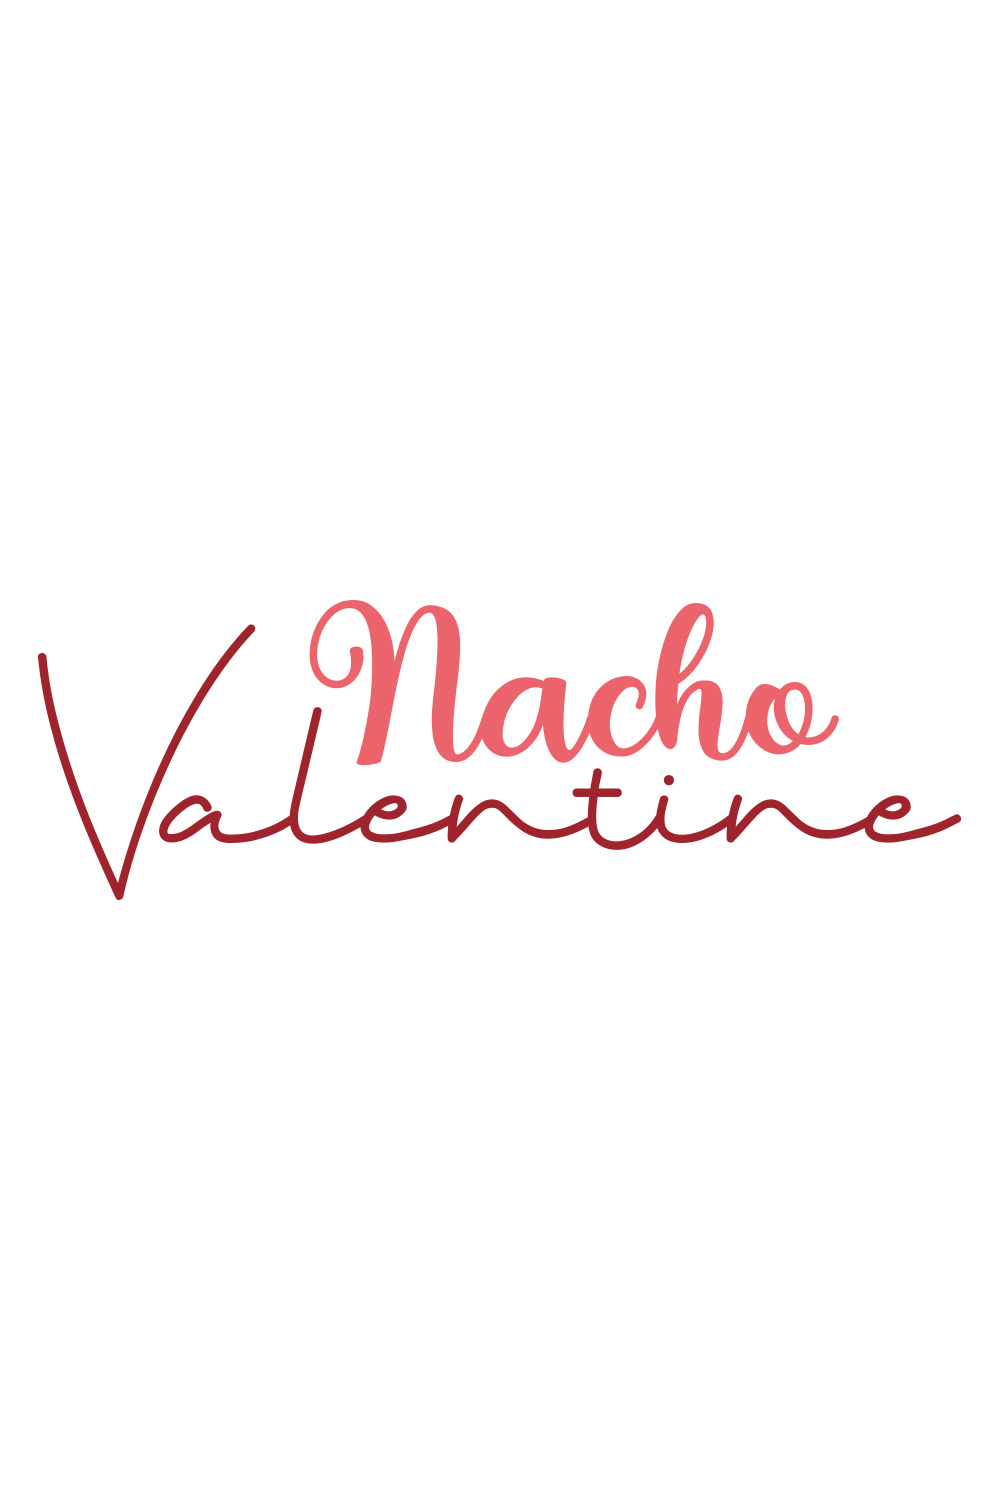 Image with exquisite Nacho Valentine print lettering